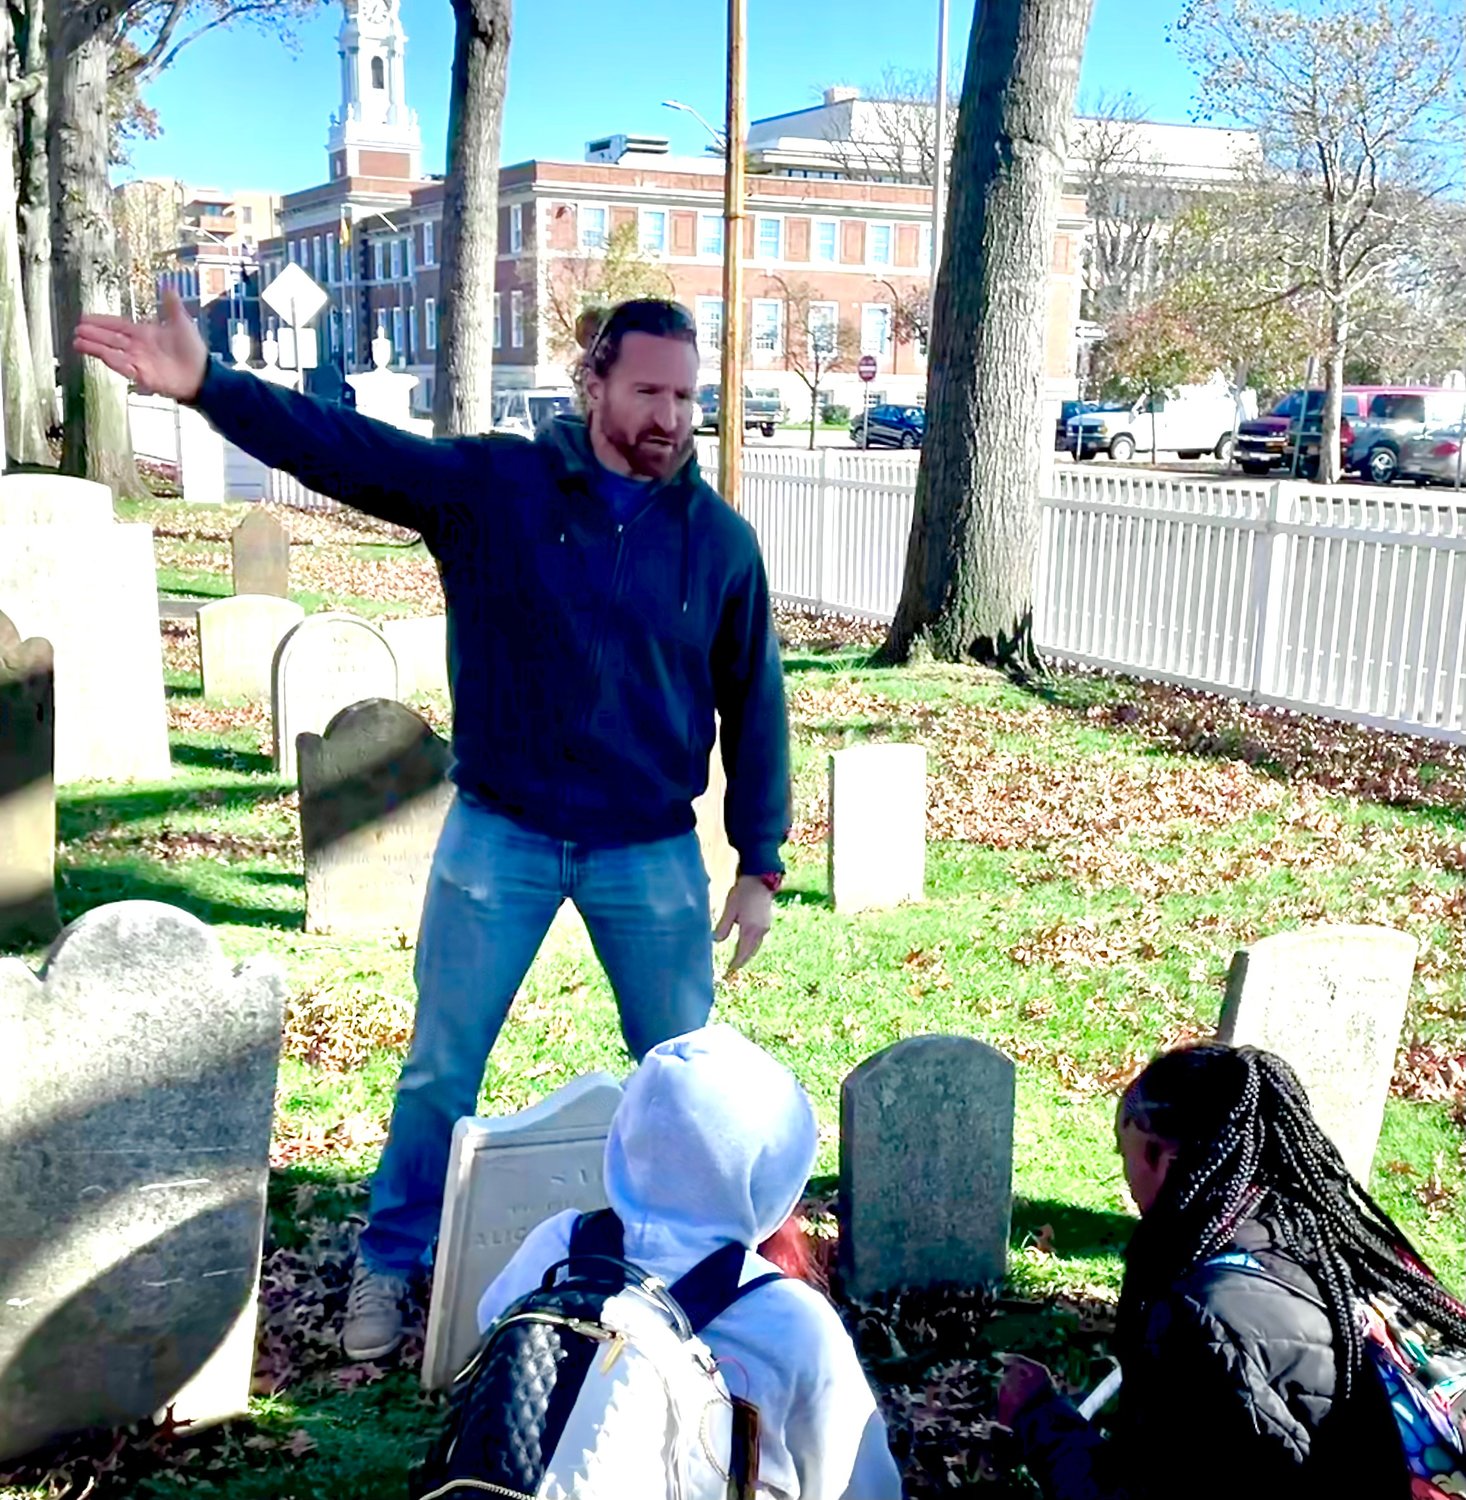 Baldwin High School science teacher Daniel Baxt explained the unique mix of human and geological history contained in the gravestones at St. George’s Episcopal Church in Hempstead.